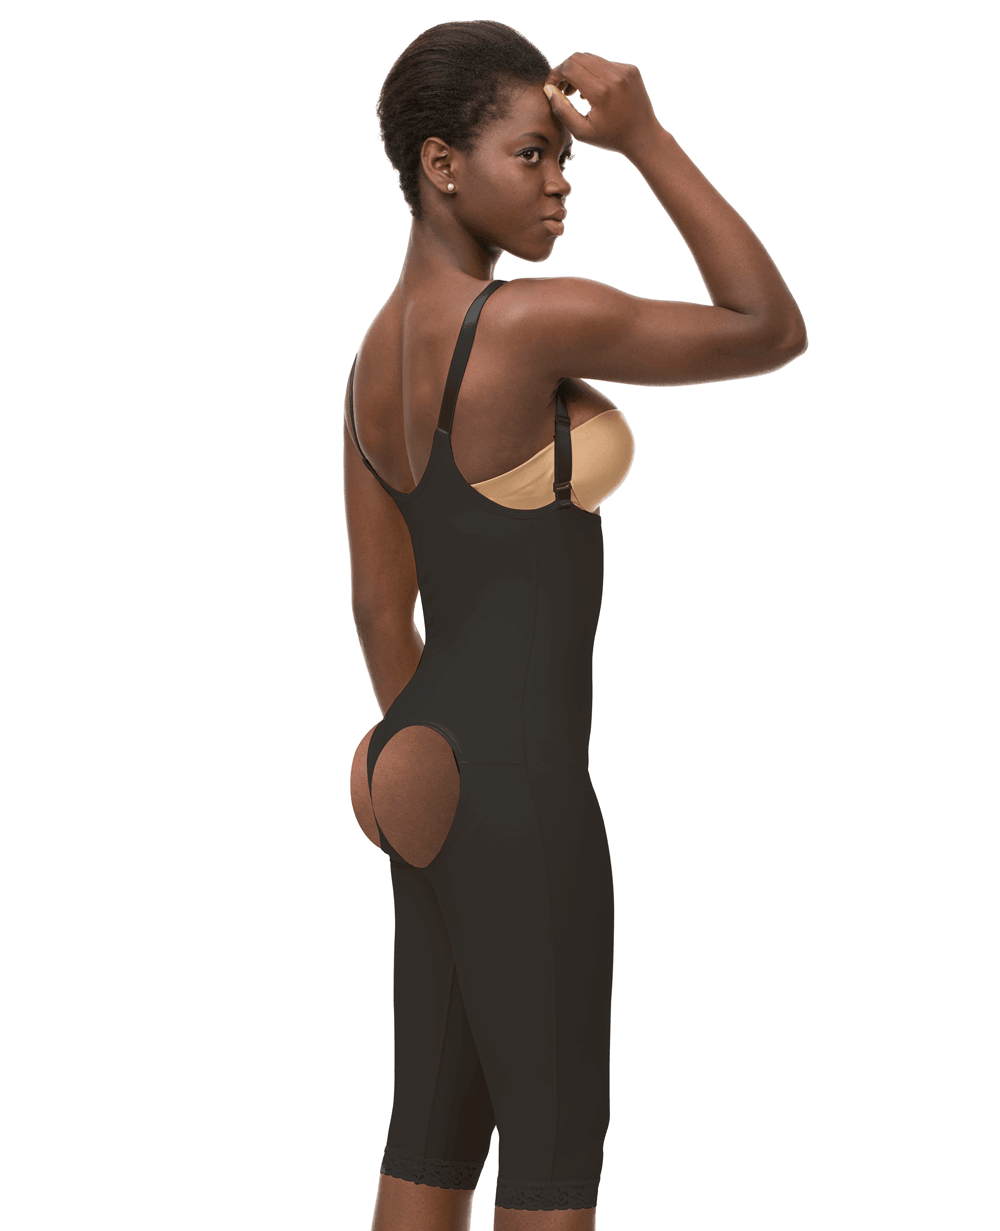 2nd Stage Body Suit Below Knee Length with Suspender Open Buttocks Enhancing Compression Girdle (BE06-BK) - Isavela Compression Garments